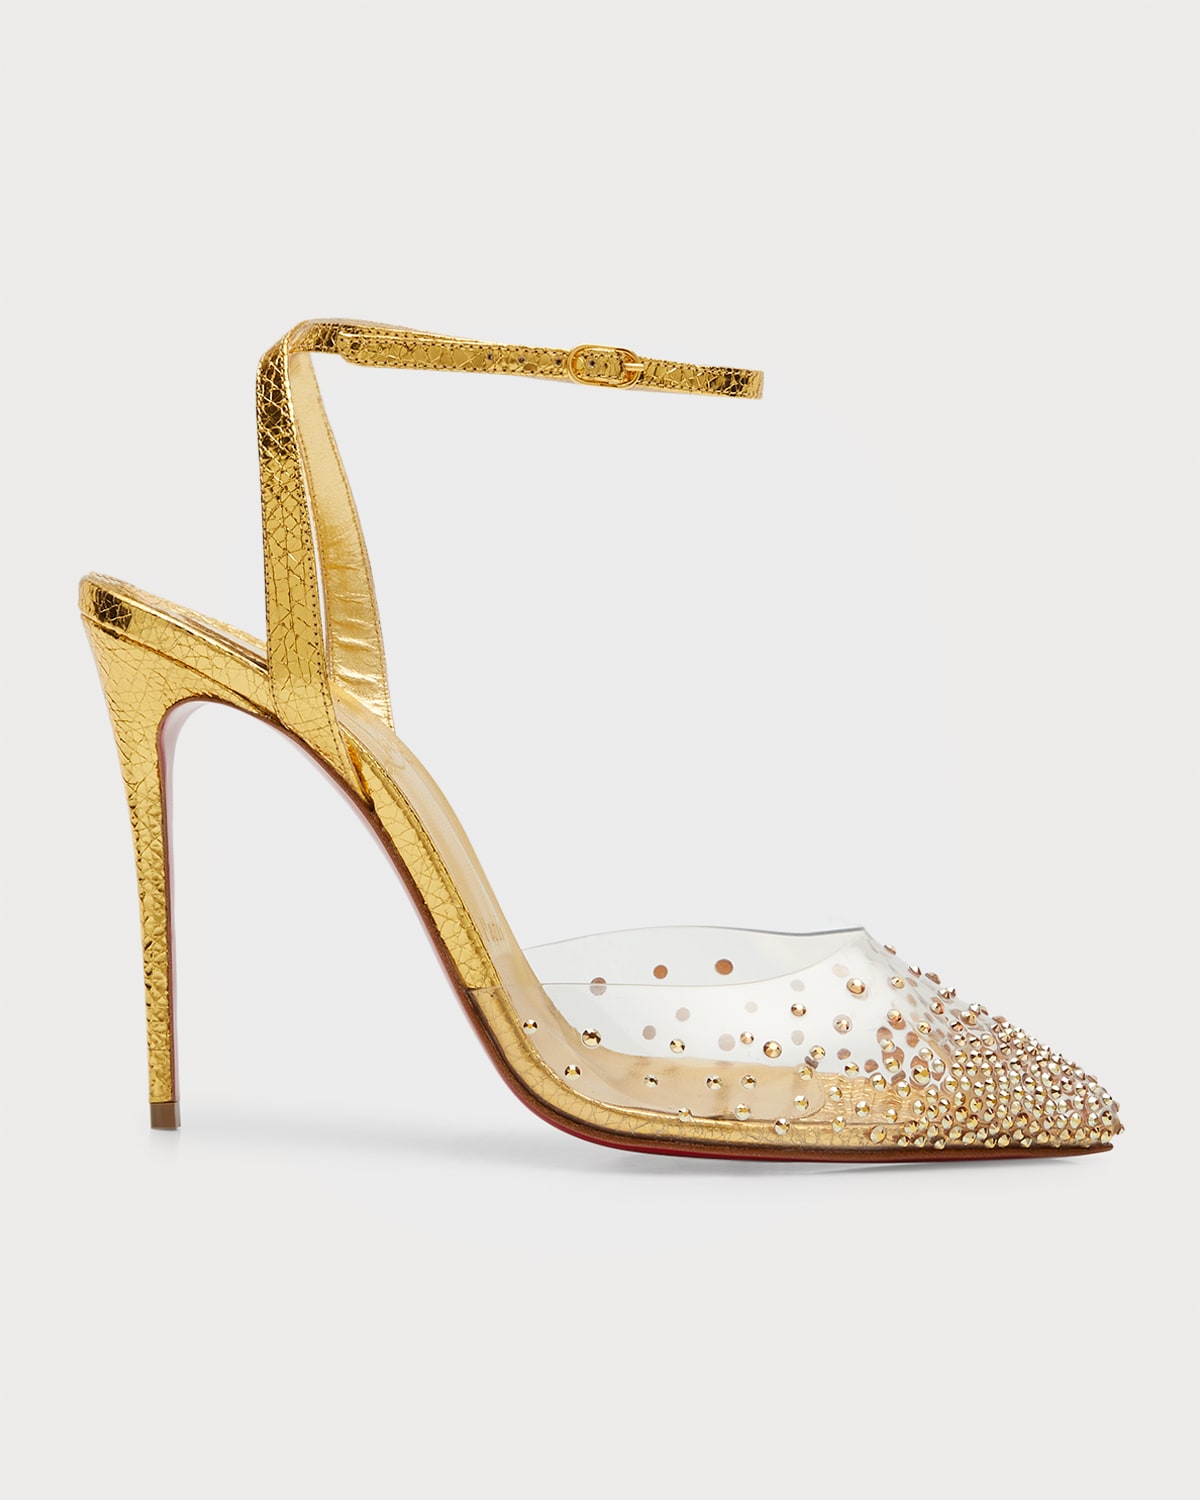 CHRISTIAN LOUBOUTIN SPIKAQUEEN CRYSTAL ANKLE-STRAP RED SOLE PUMPS